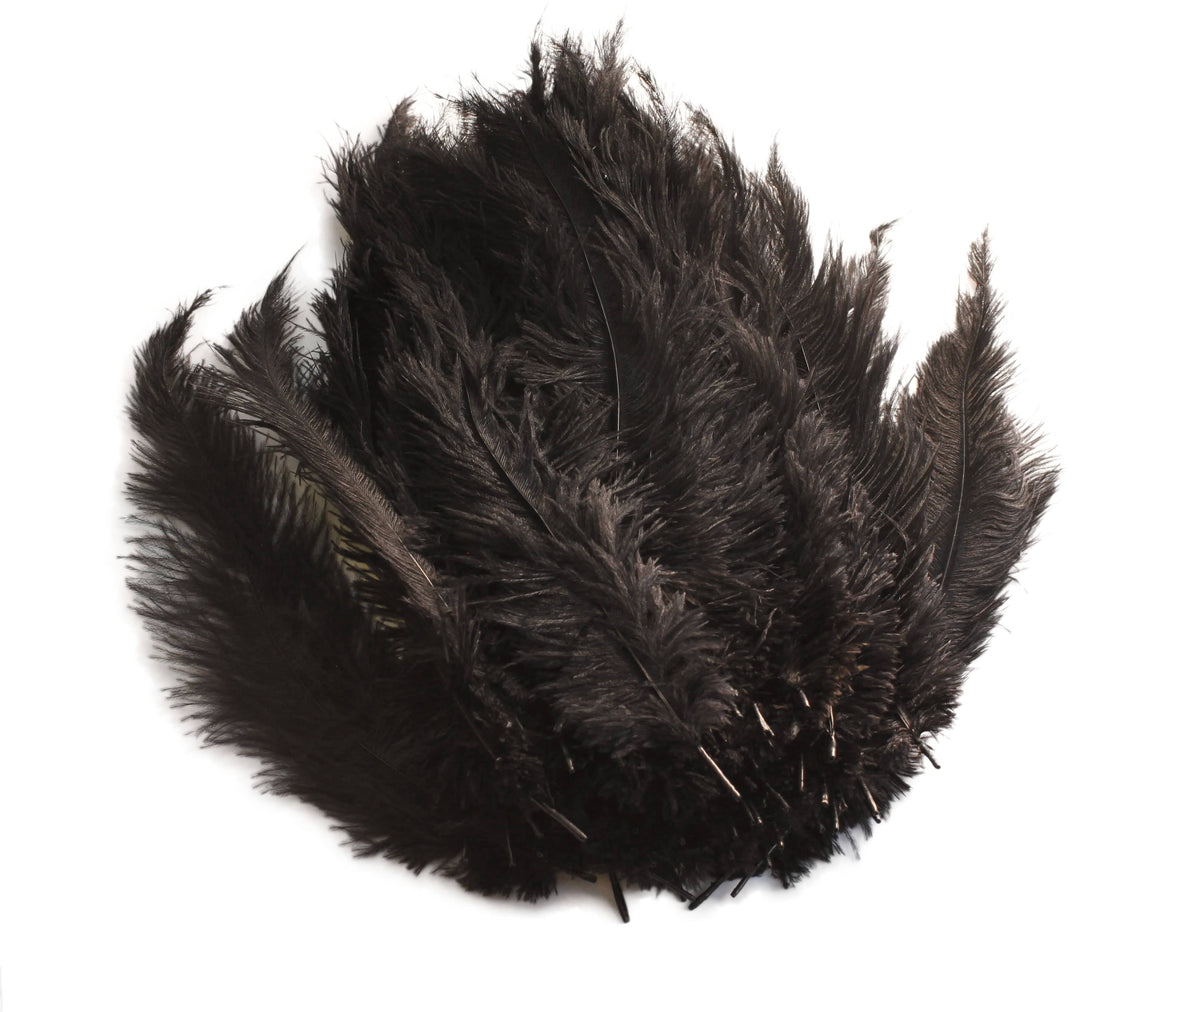 Ostrich Feather Spad Plumes 13-16 (Black) for Sale Online